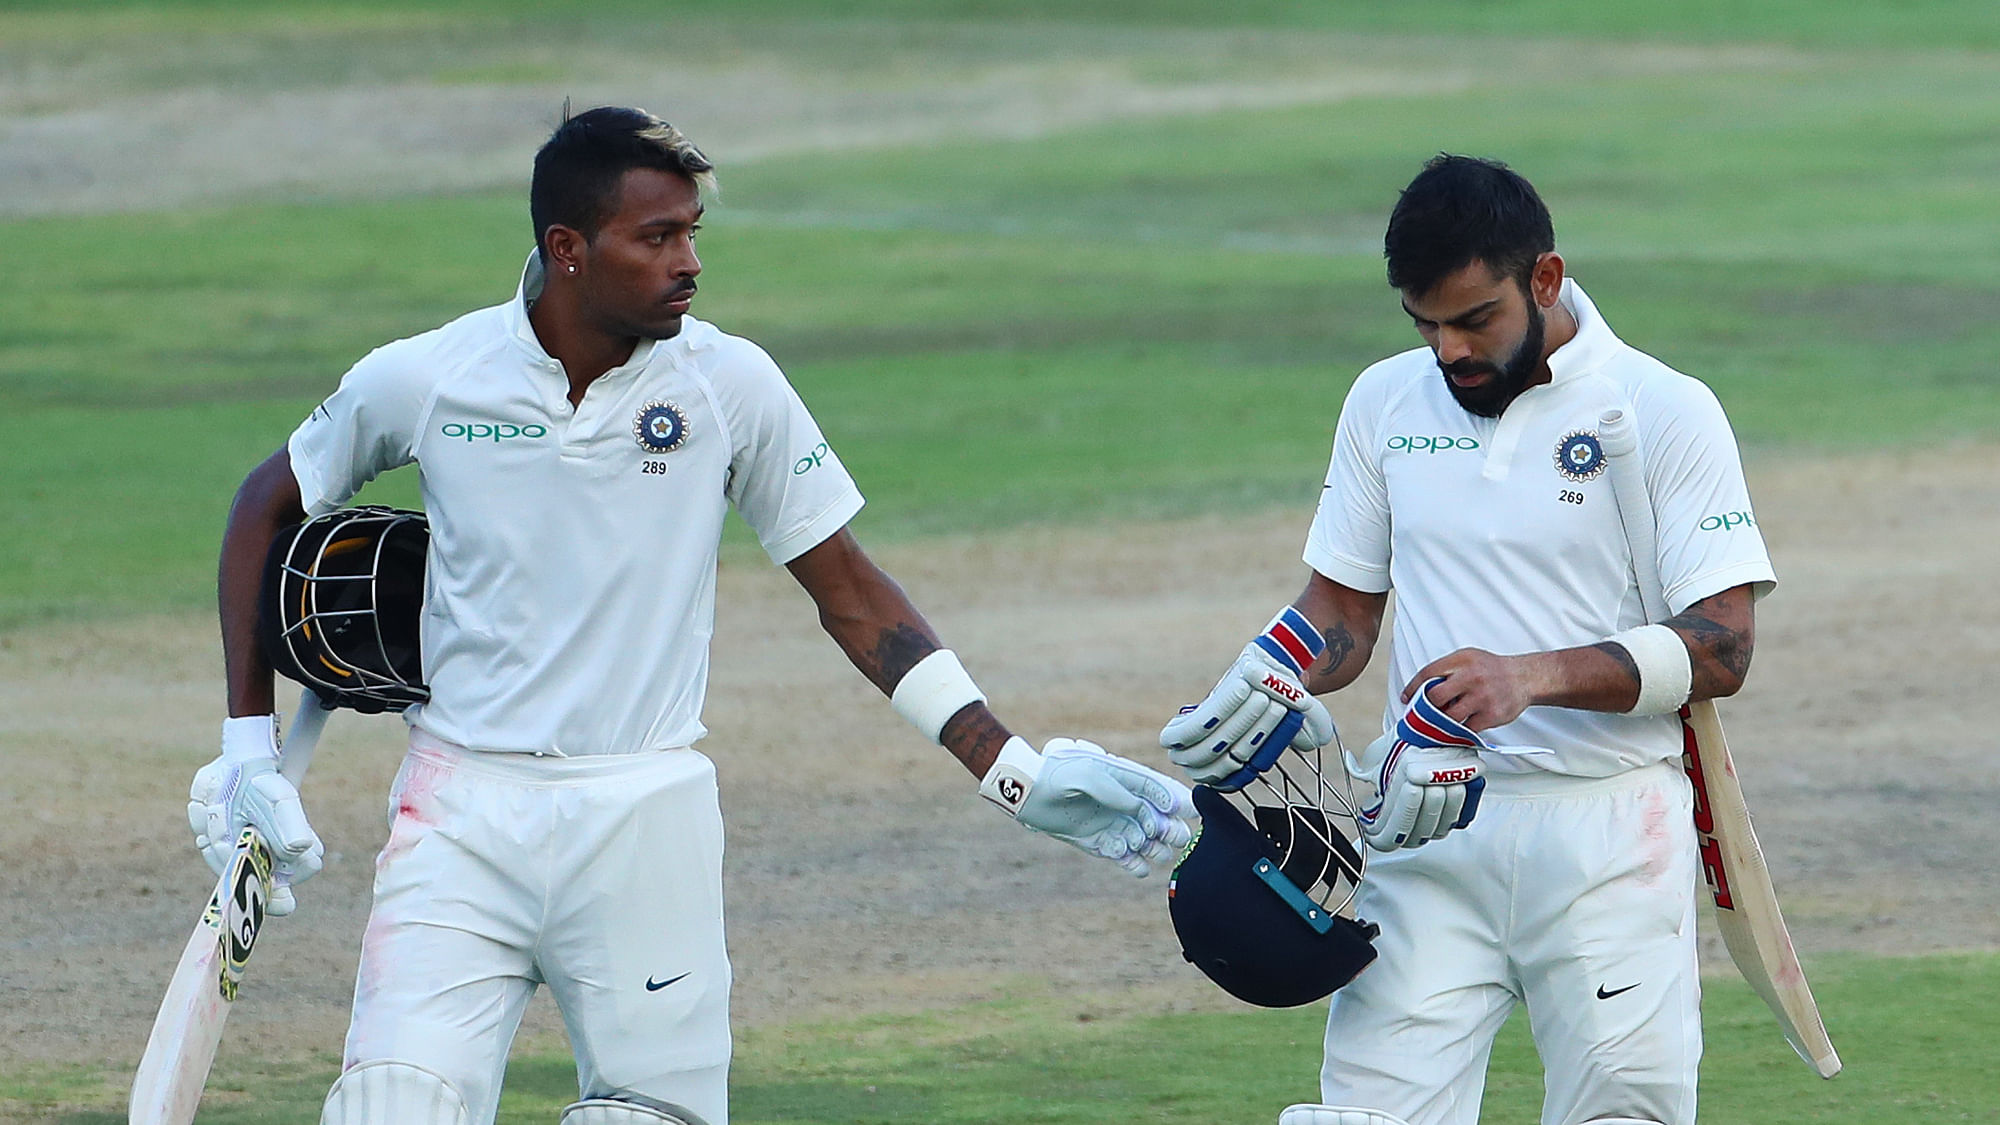 Hardik Pandya of India and Virat Kohli (captain) of India leave the field at the end of play.&nbsp;